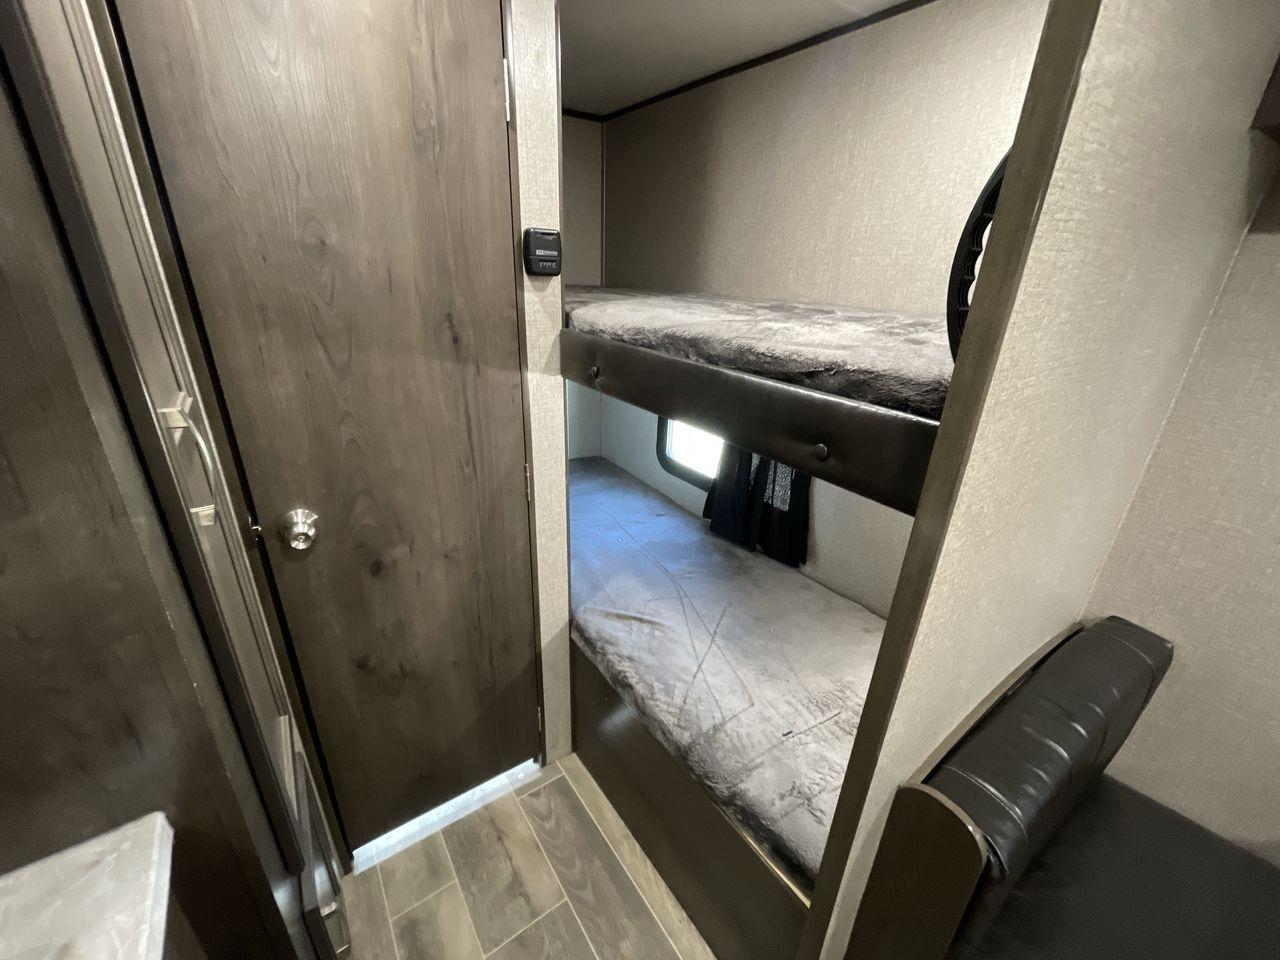 2021 JAYCO JAY FLIGHT SLX 174BH (1UJBJ0AJ1M1) , Length: 21.67 ft | Dry Weight: 3,075 lbs | GVWR: 3,950 lbs | Slides: 0 transmission, located at 4319 N Main St, Cleburne, TX, 76033, (817) 678-5133, 32.385960, -97.391212 - Take the 2021 Jayco Jay Flight SLX 174BH travel trailer out on your camping adventures. This lightweight and small RV is ideal for people looking for an affordable and cozy way to enjoy the great outdoors. The dimensions of this unit are 21.67 ft in length, 7.08 ft in width, and 9.17 ft in height. I - Photo #13